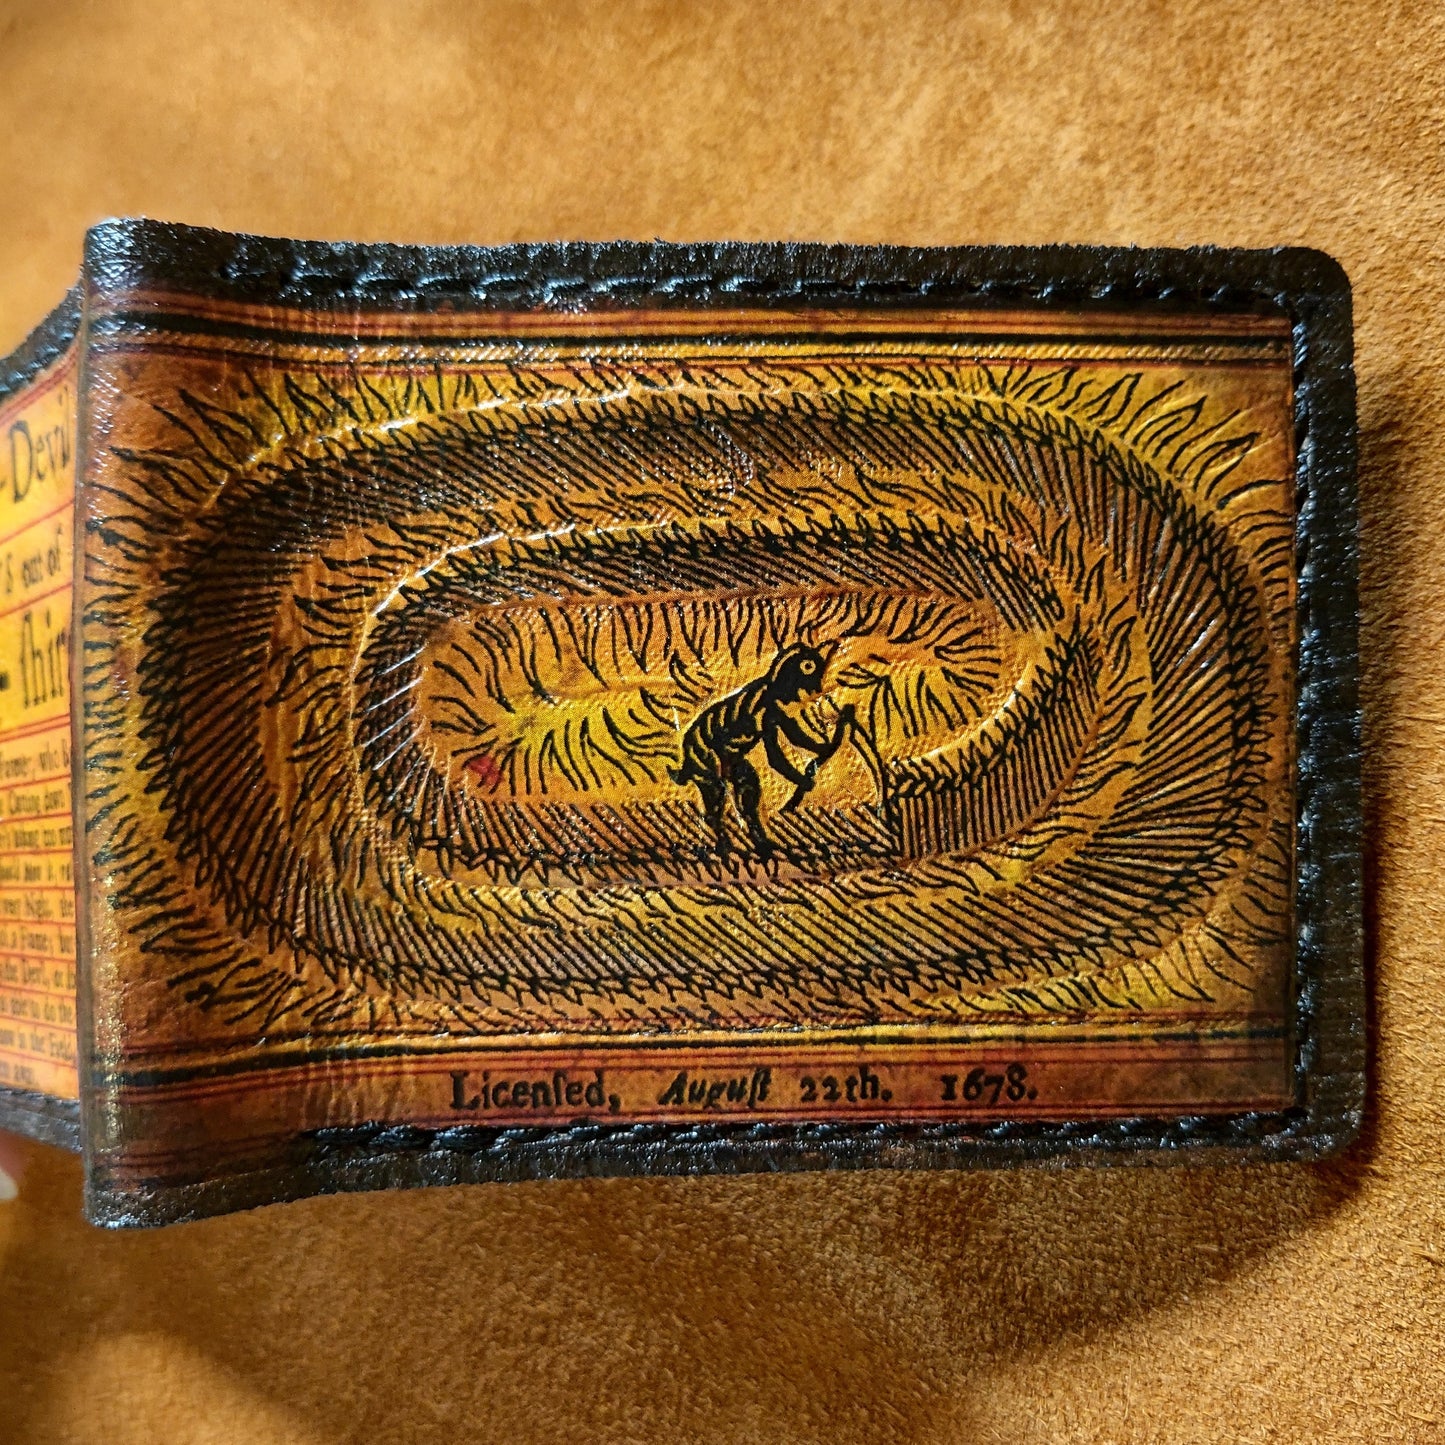 Mowing Devil - Crop Circle - leather wallet- Dark Brown and ivory colour - Leather Bifold Wallet - Handcrafted